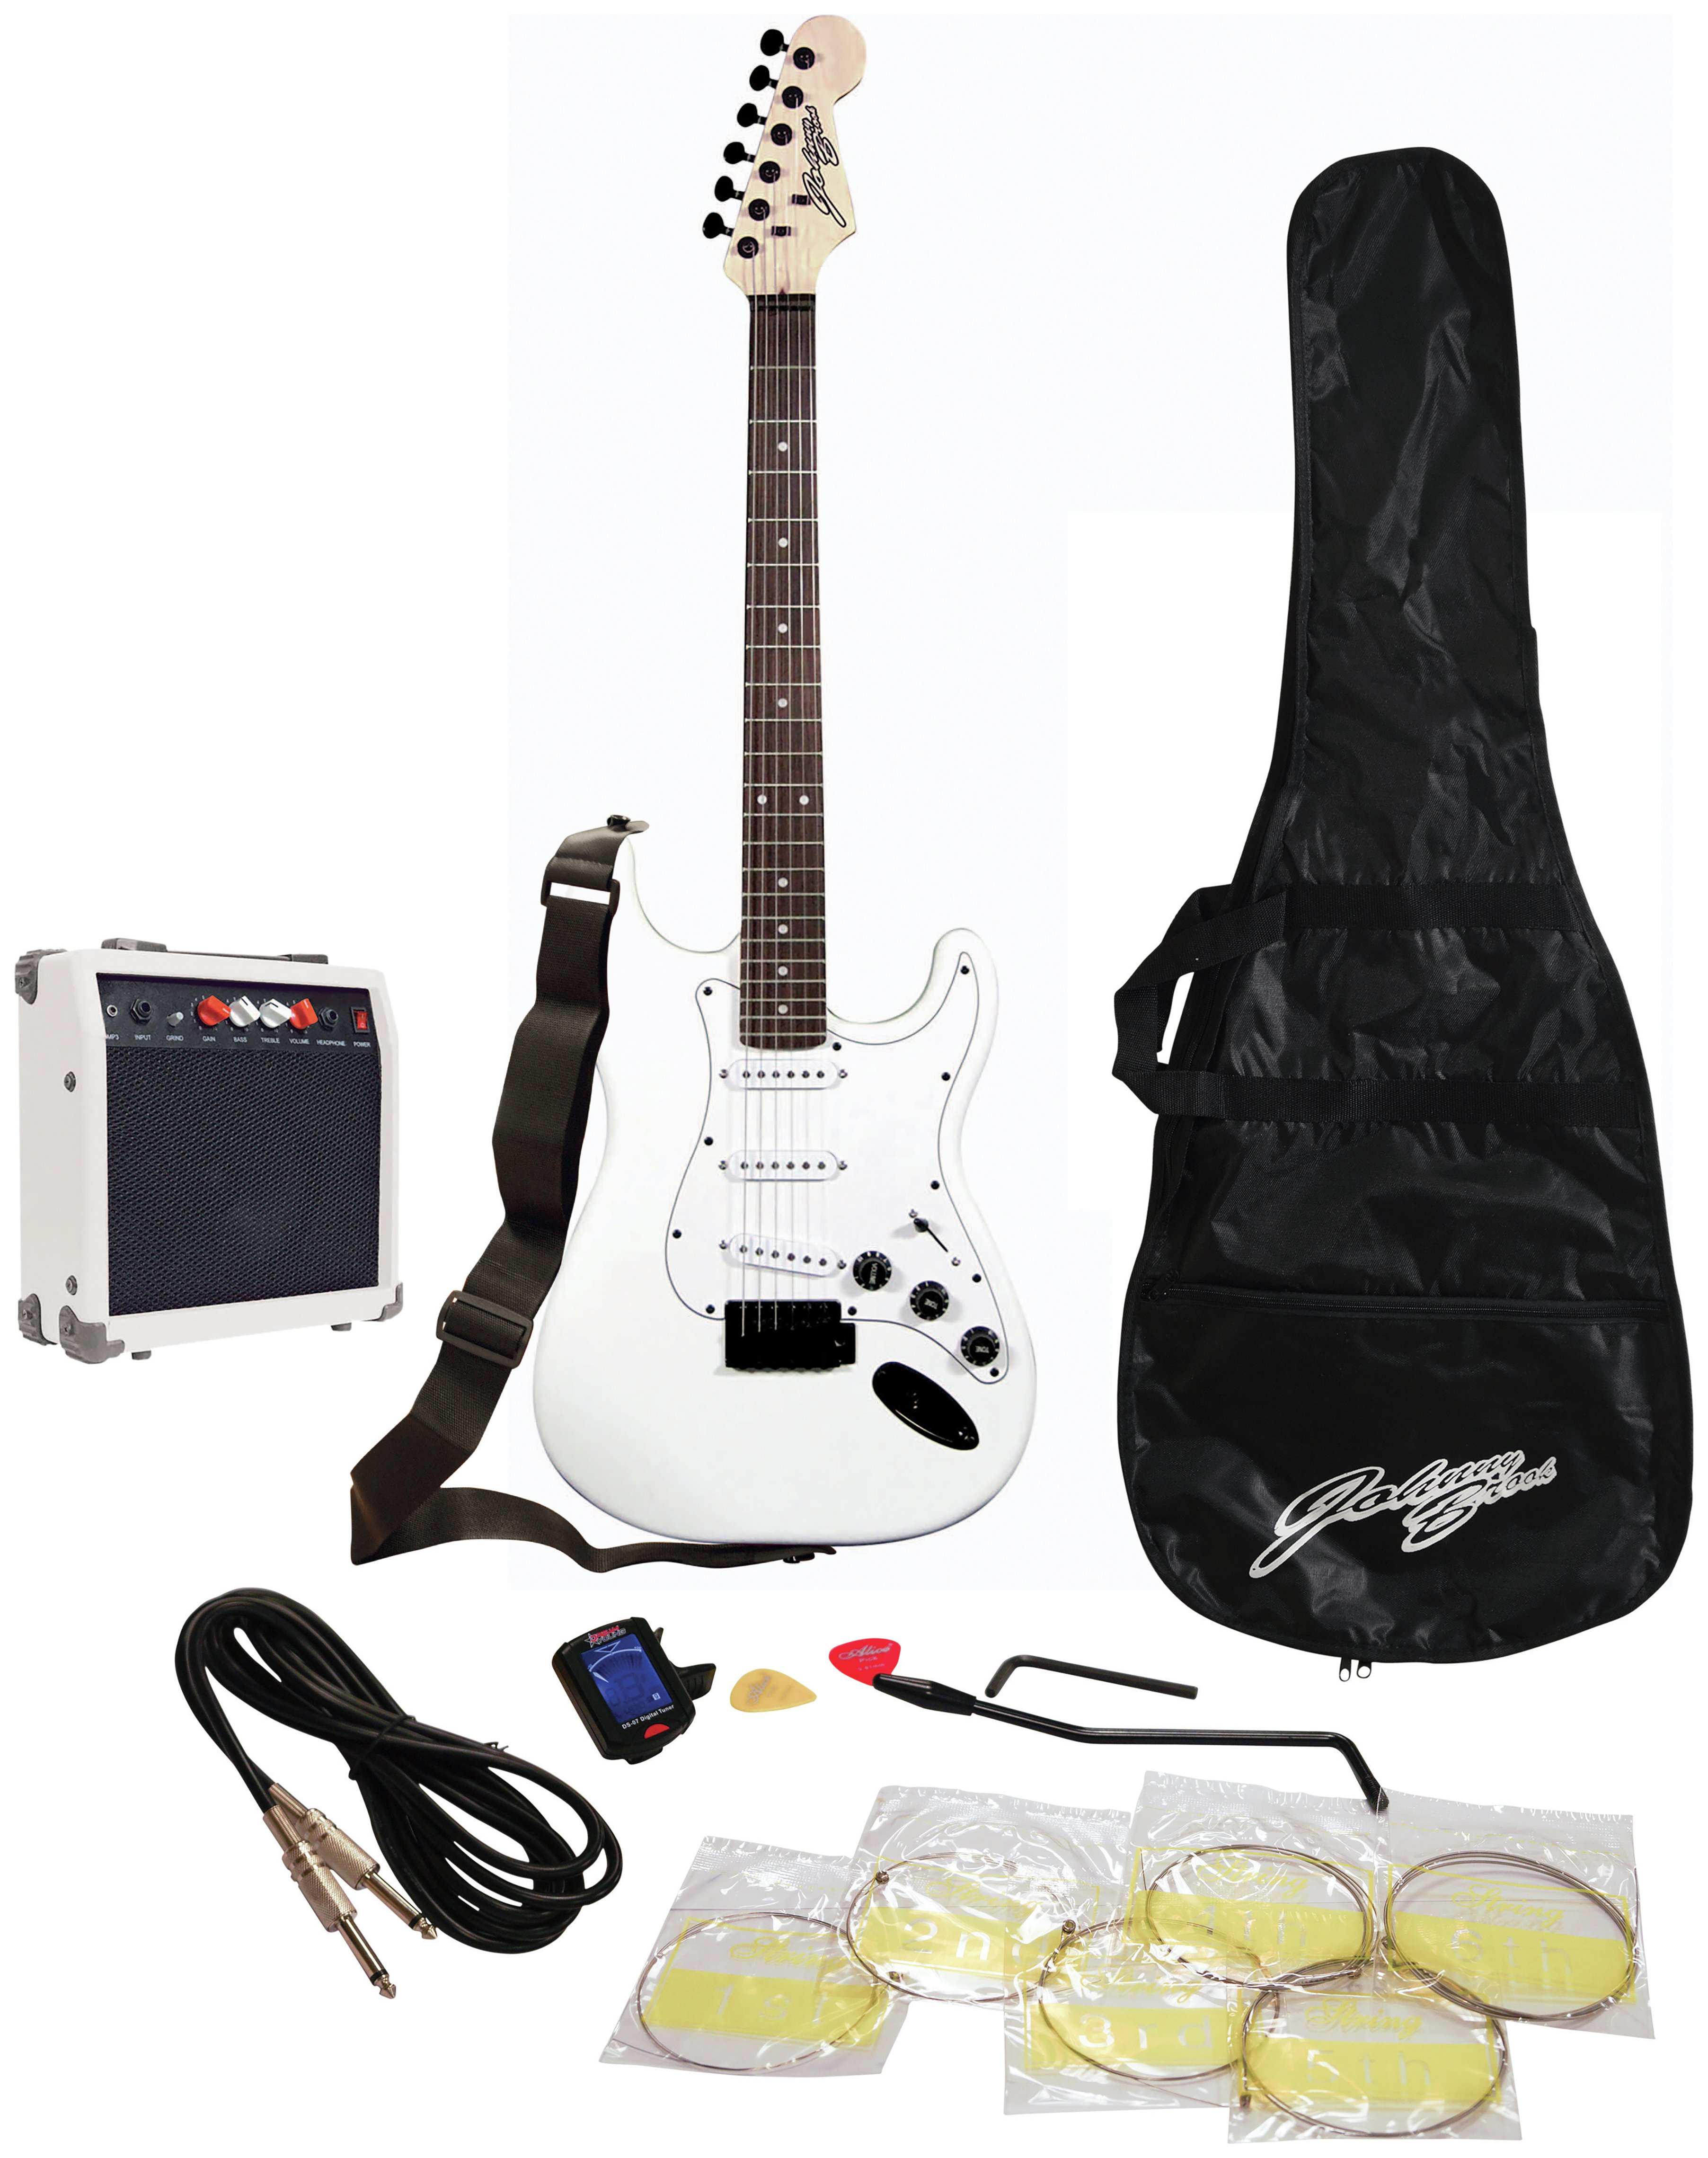 Johnny Brook Electric Guitar, 20W Amp and Accessories -White